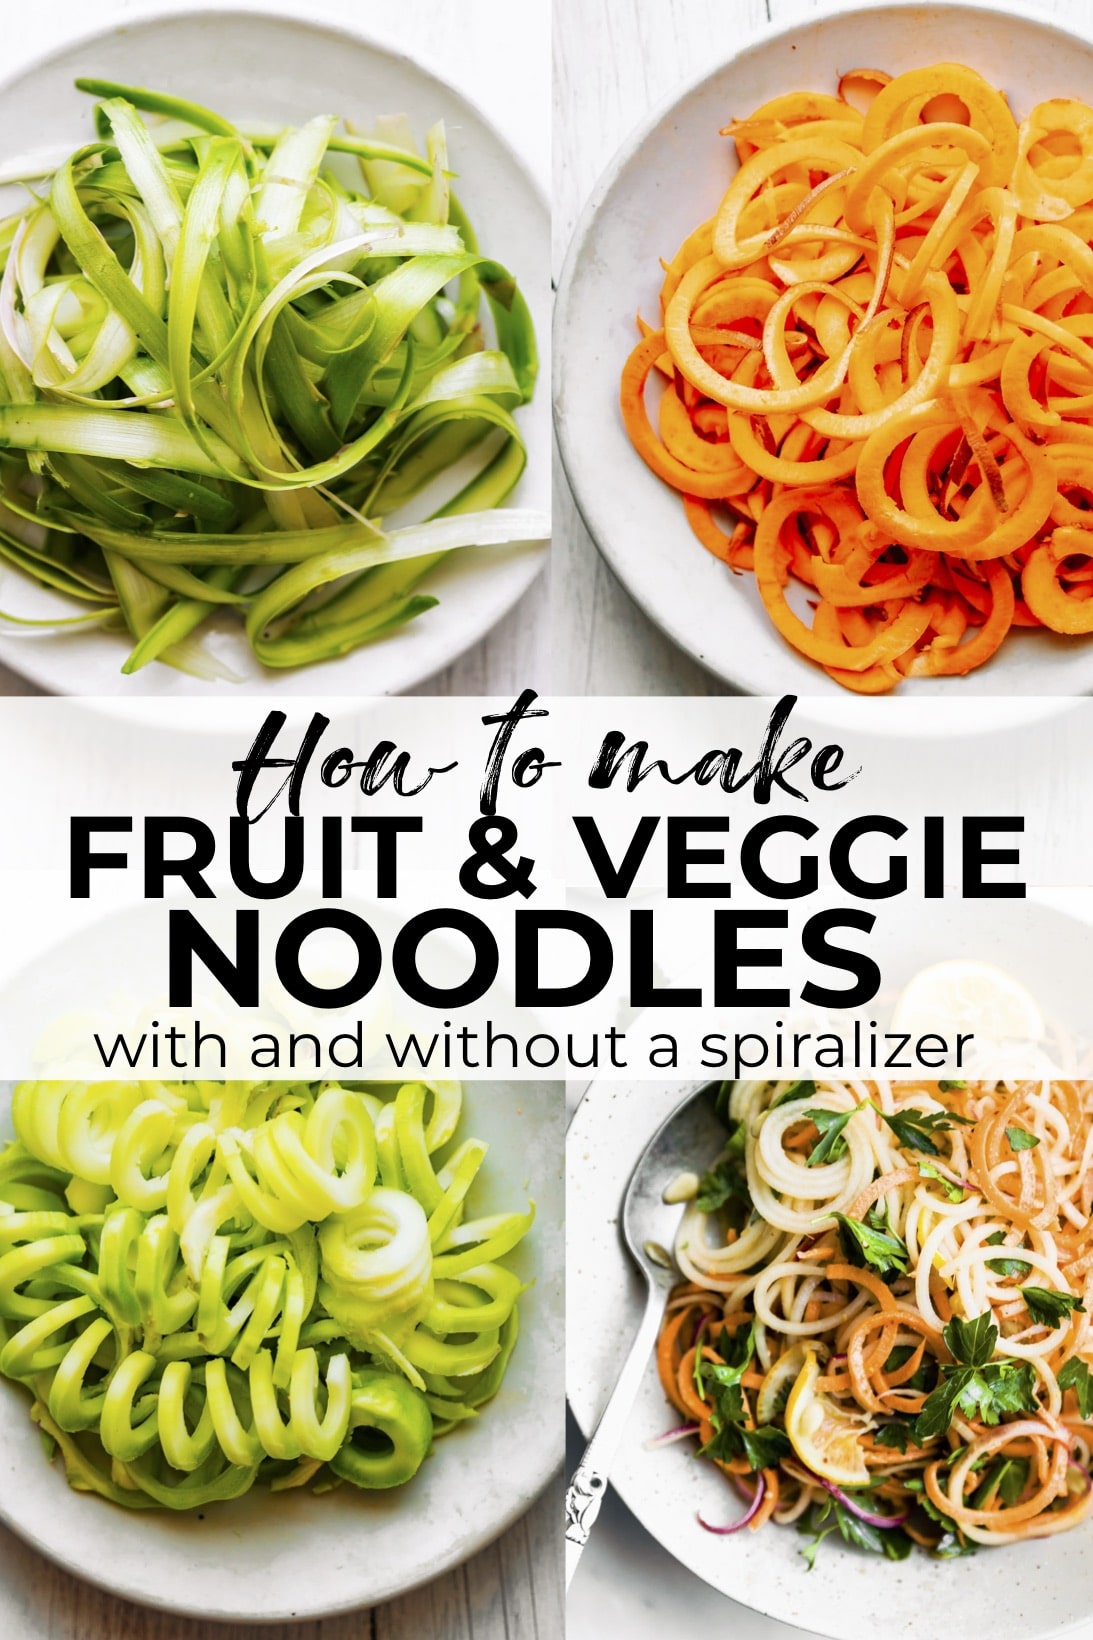 Collage of veggie and fruit noodles on white plates with text overlay.